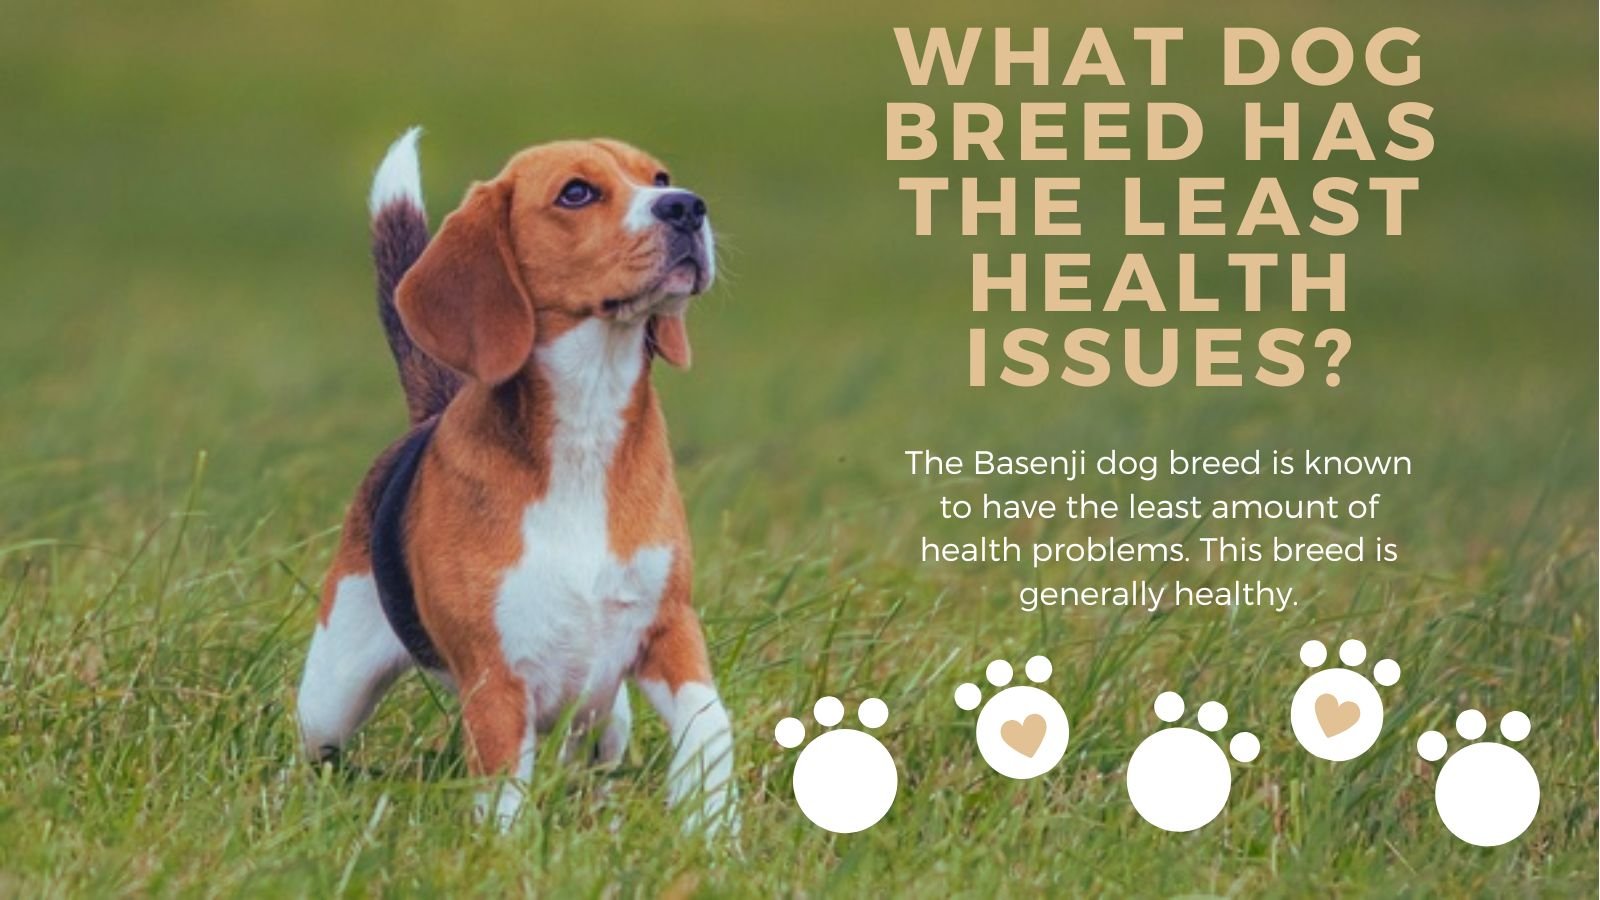 What Dog Breed Has the Least Health Issues